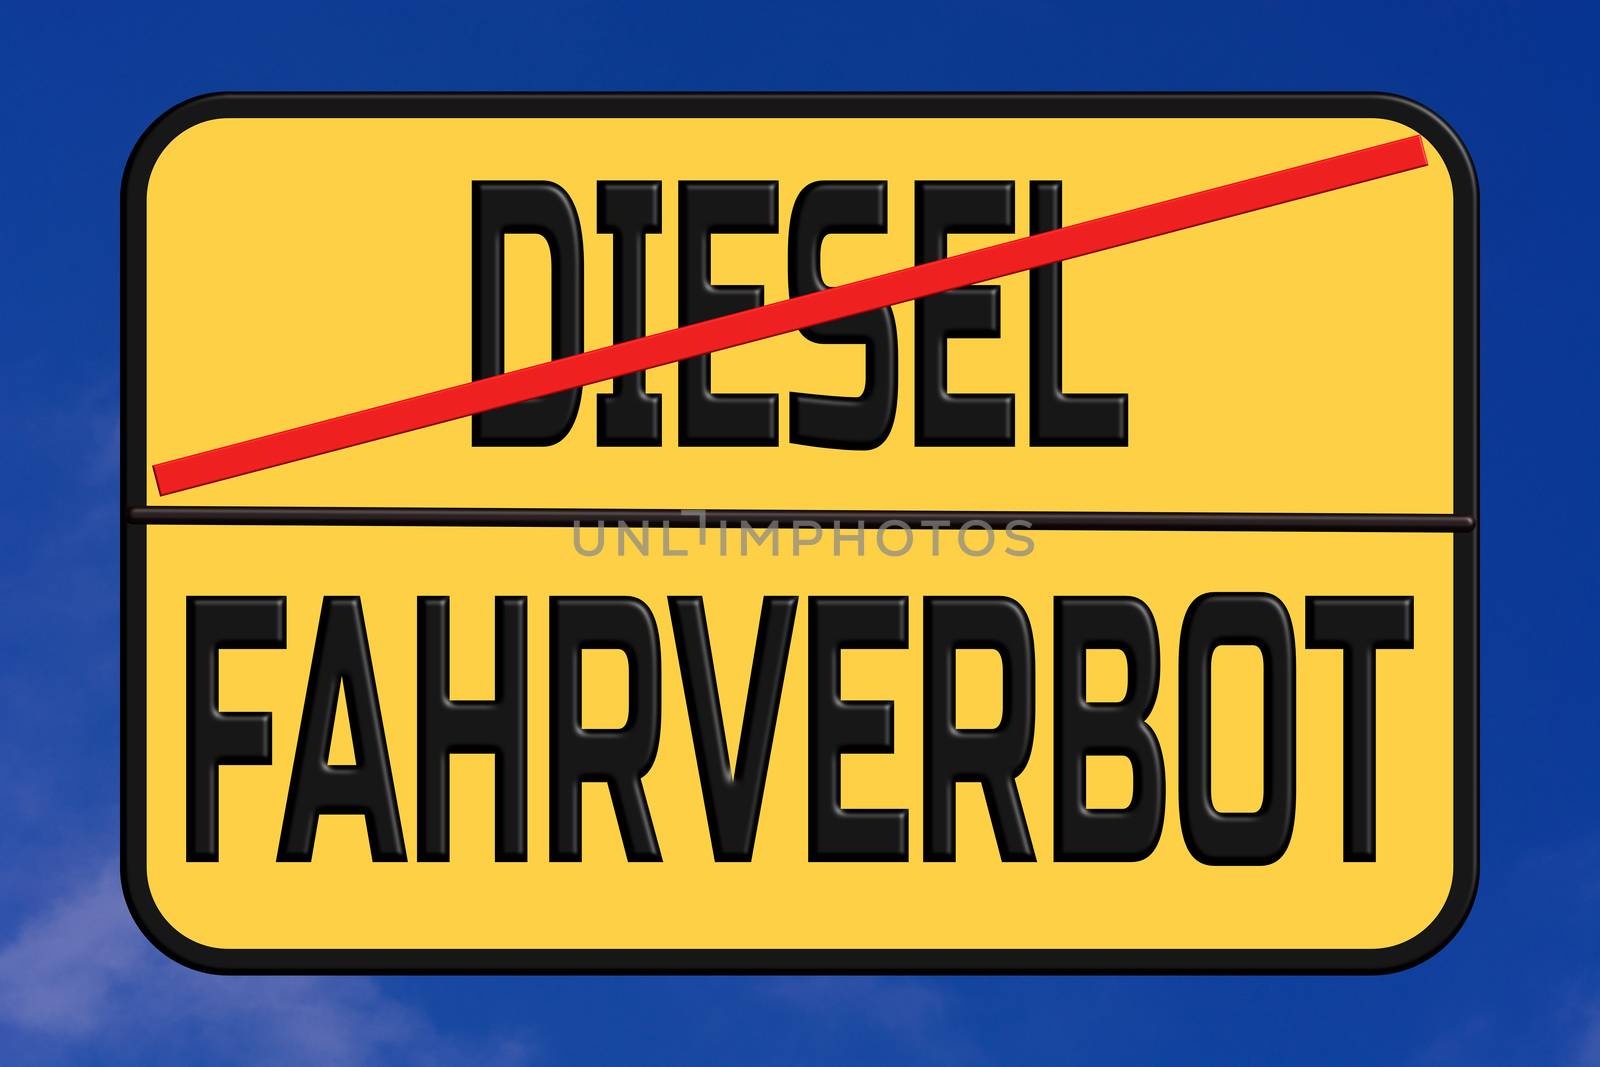 Diesel driving ban in the city street sign - in German     by JFsPic